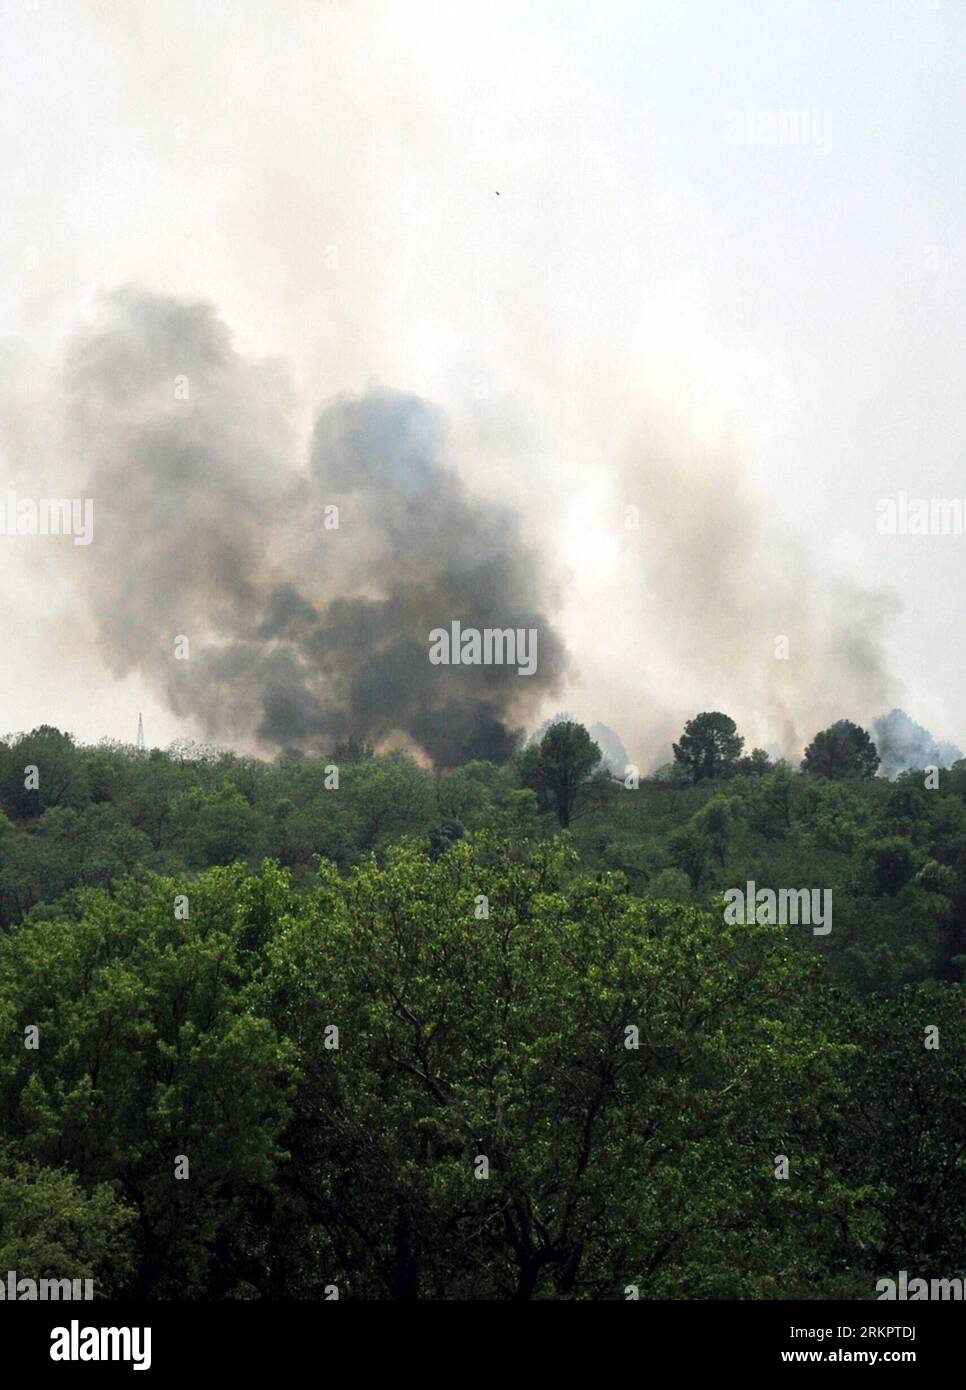 Bildnummer: 58055785  Datum: 31.05.2012  Copyright: imago/Xinhua (120531) -- ISLAMABAD, May 31, 2012 (Xinhua) -- Smoke rises from the forest in Islamabad, capital of Pakistan on May 31, 2012. Fire erupted on Margala Hills due to hot weather, gutting a huge stretch of forest. (Xinhua/Ahmad Kamal) PAKISTAN-ISLAMABAD-FOREST FIRE PUBLICATIONxNOTxINxCHN Gesellschaft Waldbrand Brand Feuer Rauch xbs x0x 2012 hoch      58055785 Date 31 05 2012 Copyright Imago XINHUA  Islamabad May 31 2012 XINHUA Smoke Rises from The Forest in Islamabad Capital of Pakistan ON May 31 2012 Fire erupted ON Margala Hills D Stock Photo